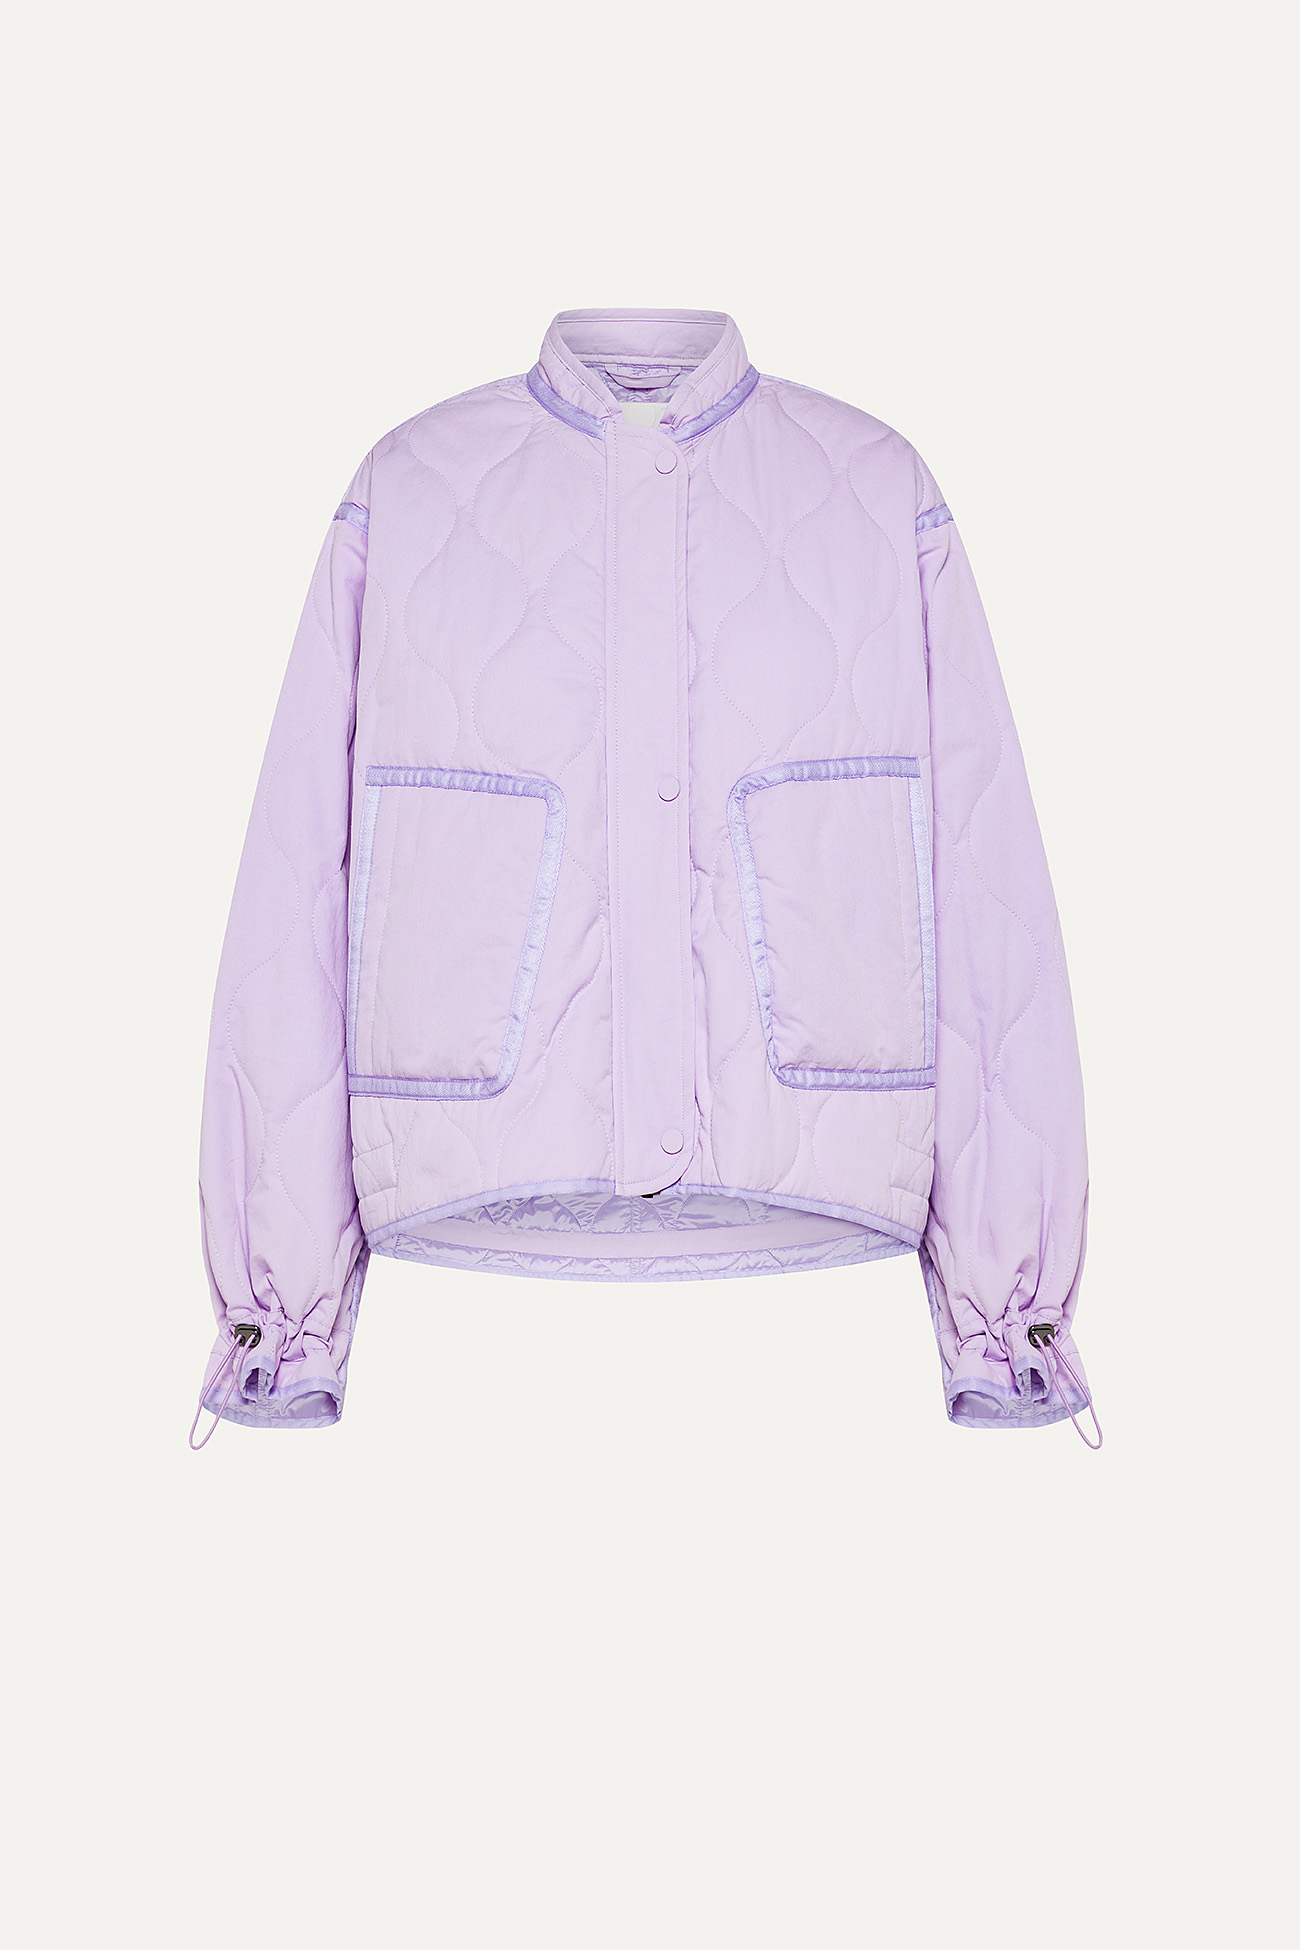 FLARED SHORT JACKET IN QUILTED COTTON 9224 - LILAC - OOF WEAR